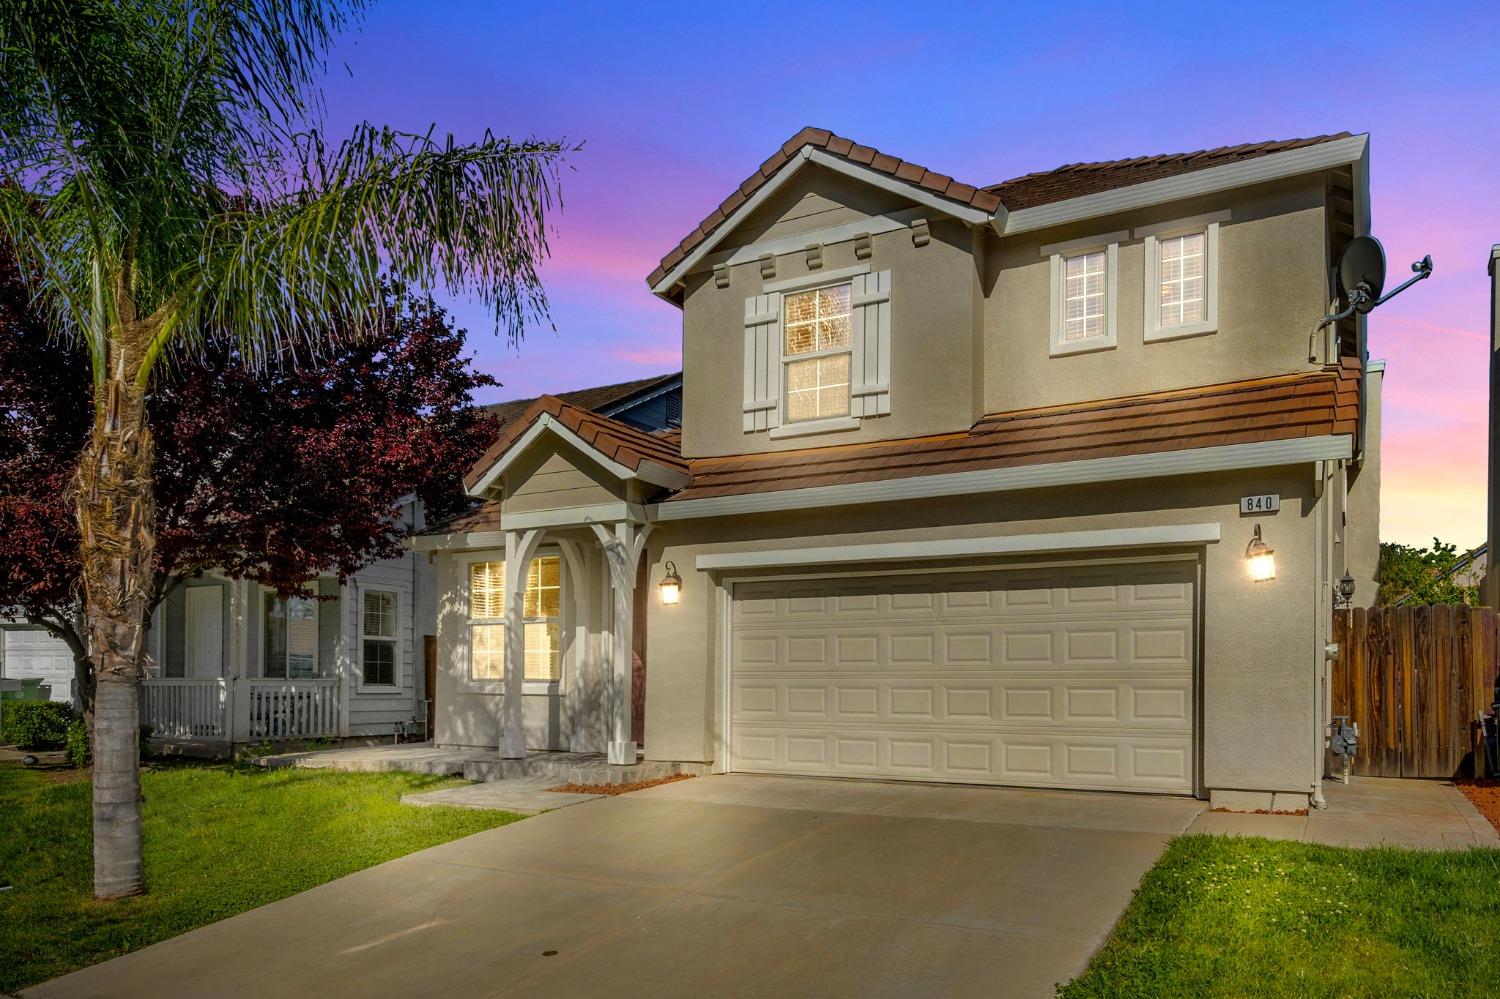 Photo of 840 Kennedy Pl in Tracy, CA